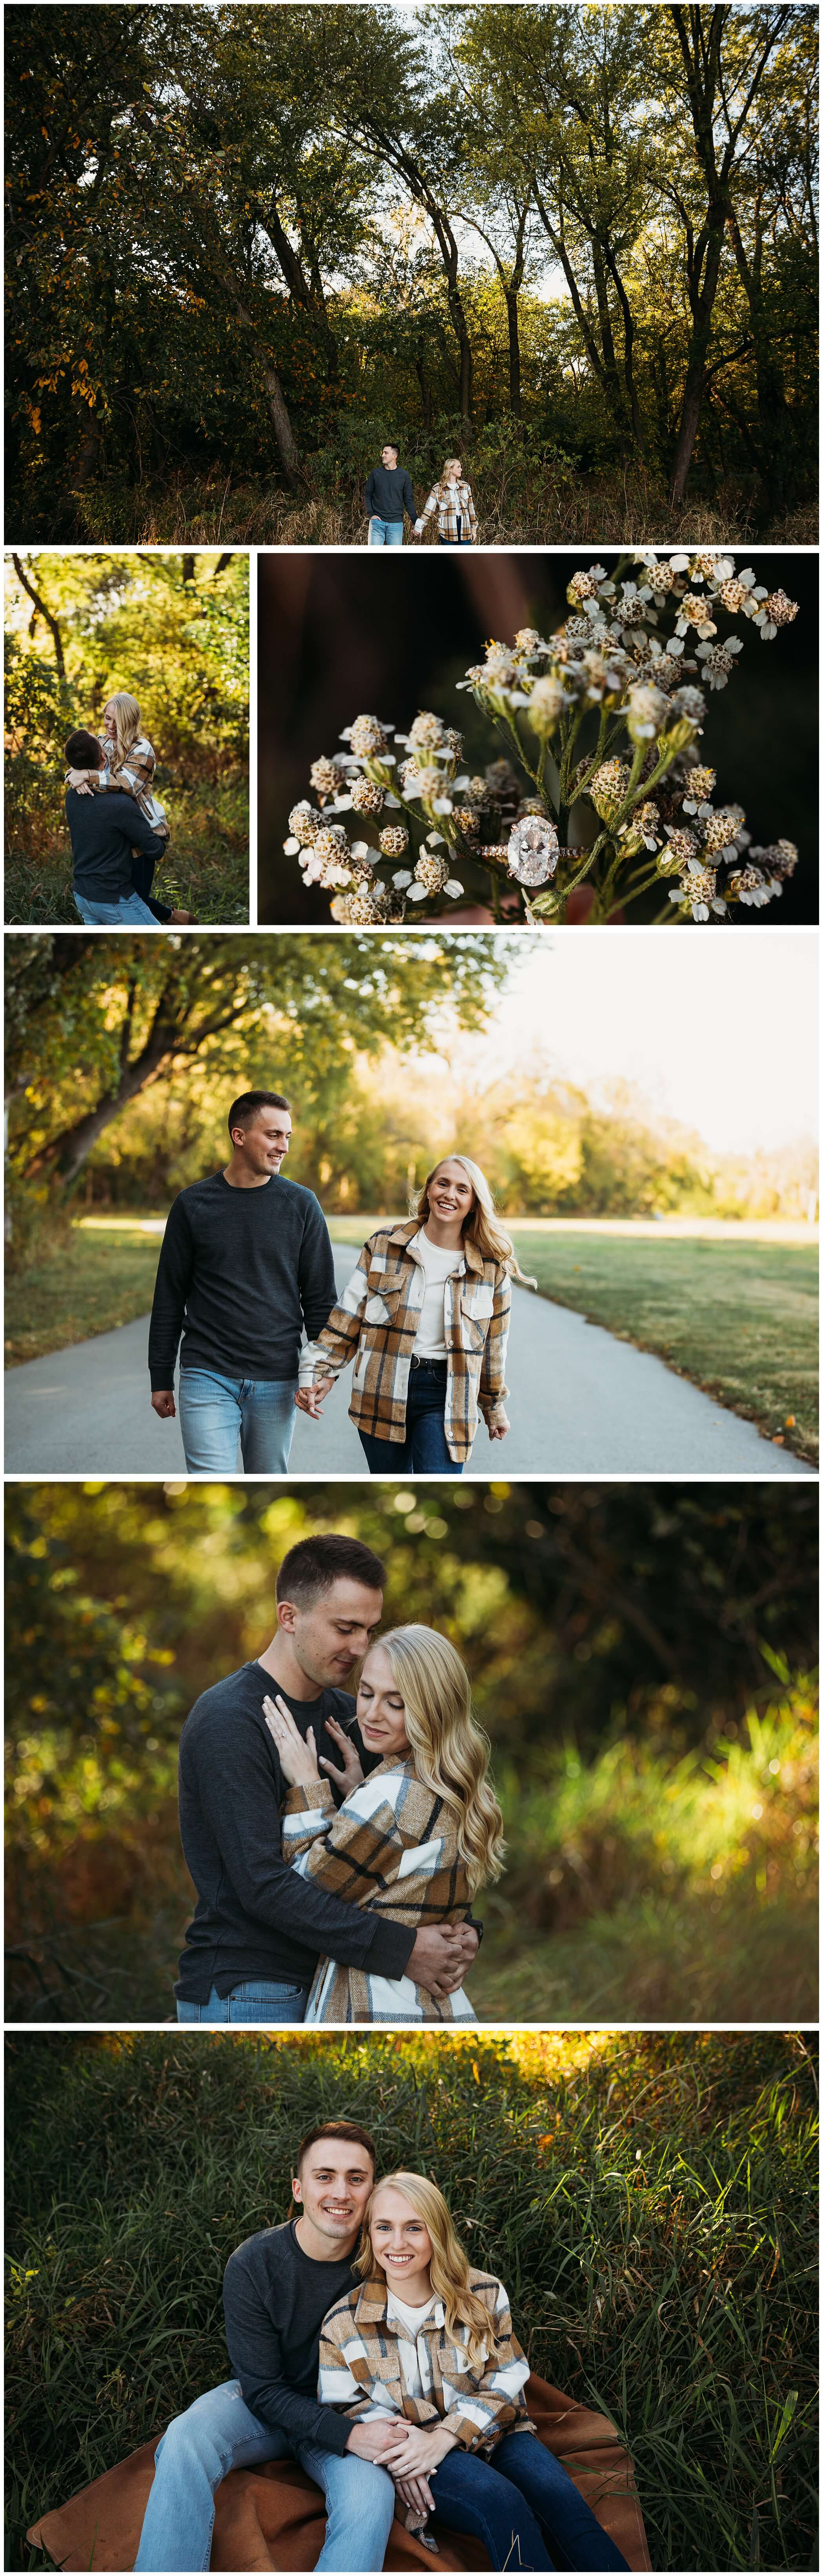 Fall engagement photos at Water Works Park in Des Moines